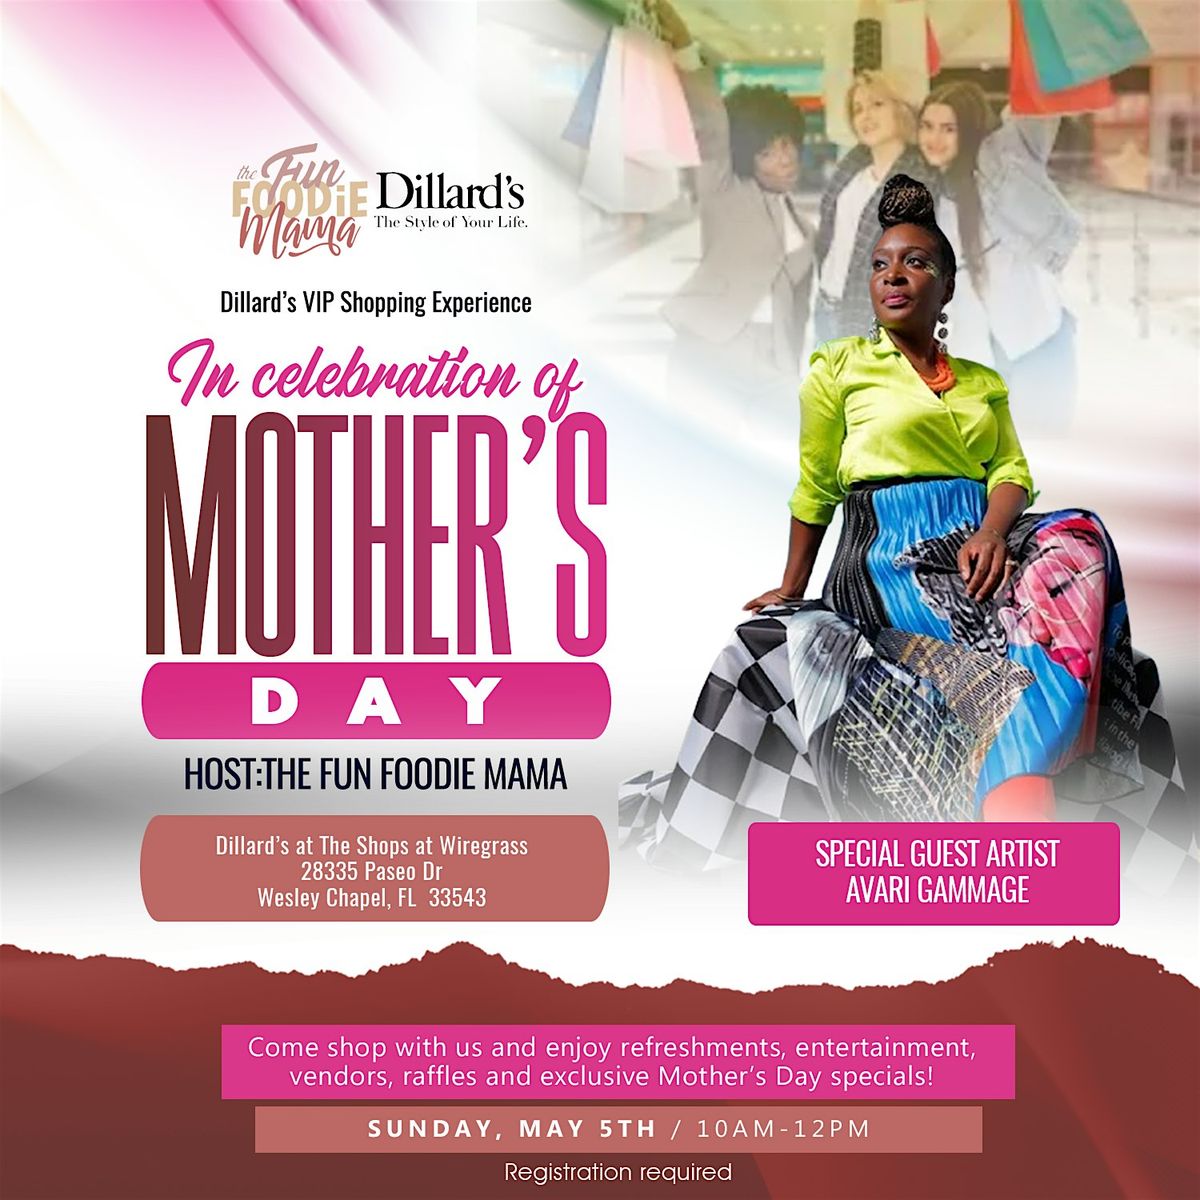 Dillard's VIP Shopping Experience - Mother's Day Edition